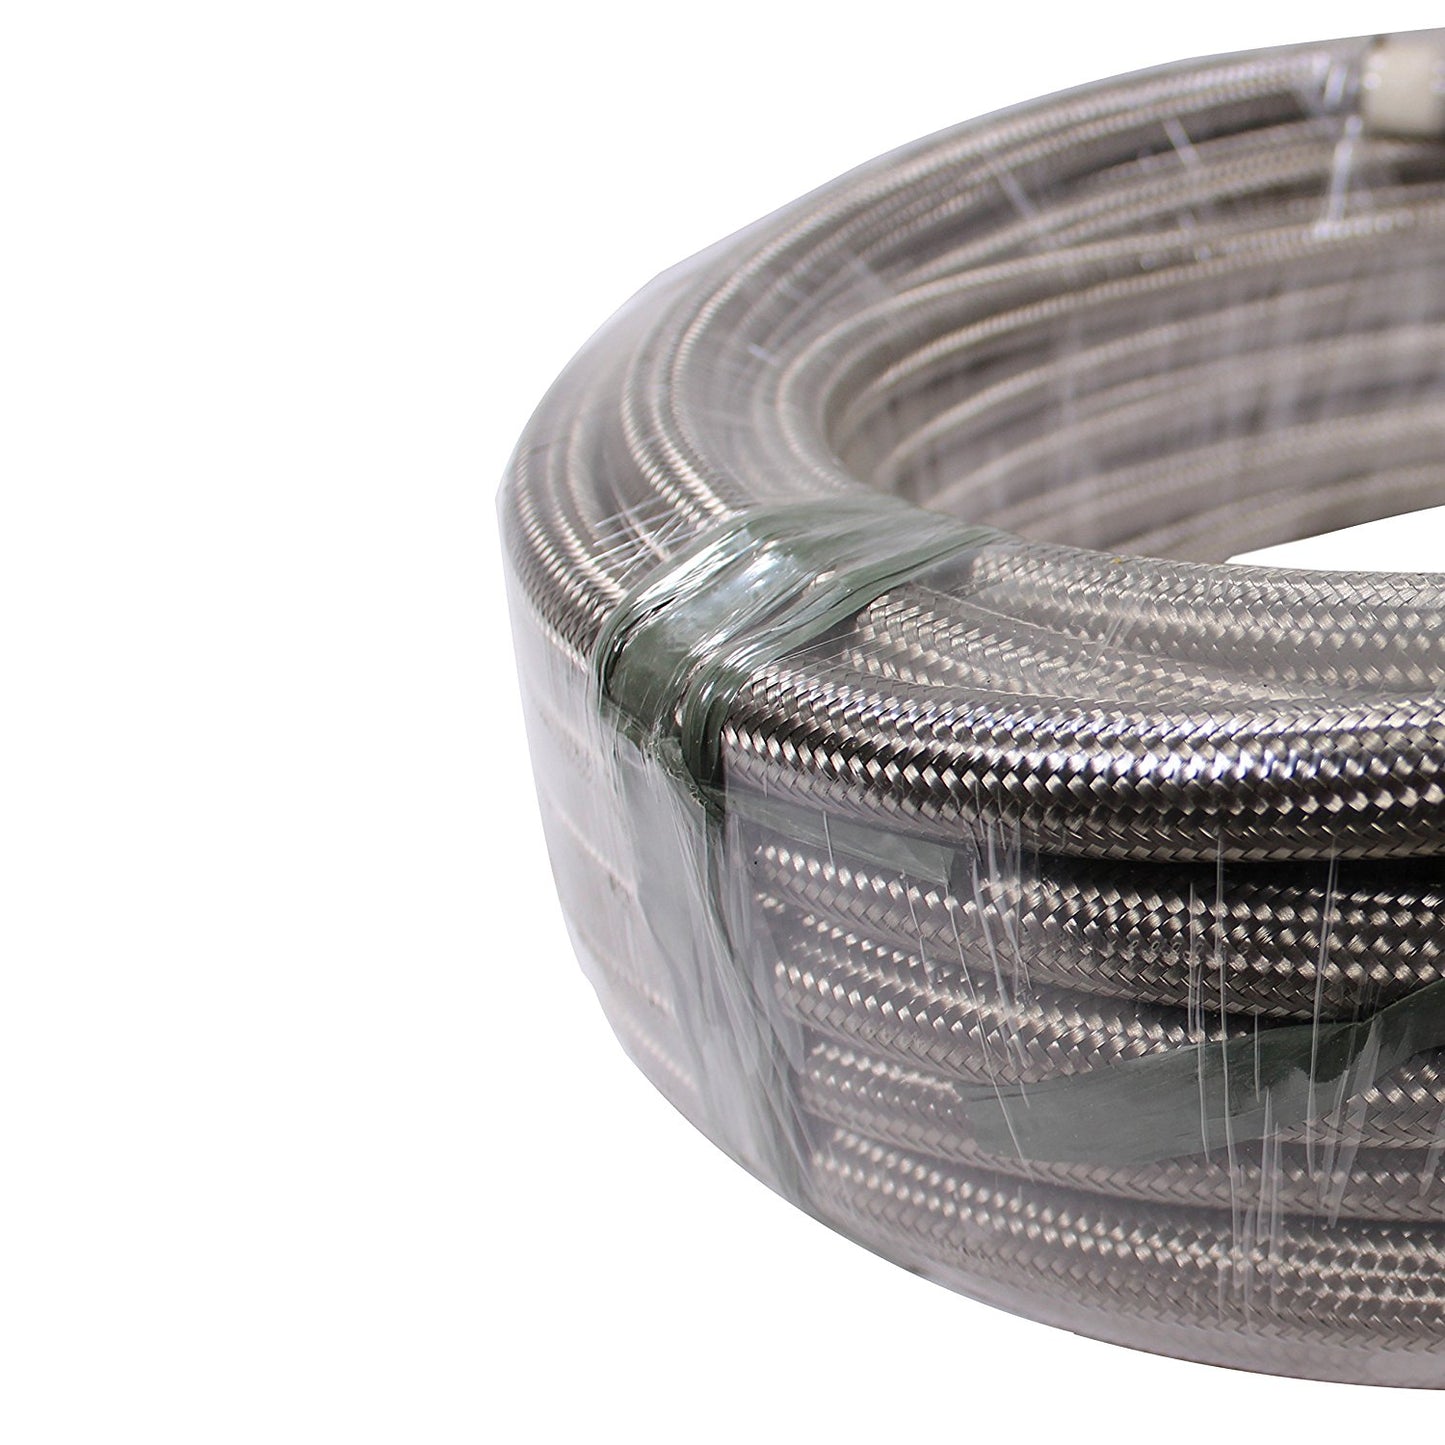 50 Feet 10-AN Braided Stainless Steel Turbo Oil Fuel Gas Line Hose 1500 PSI